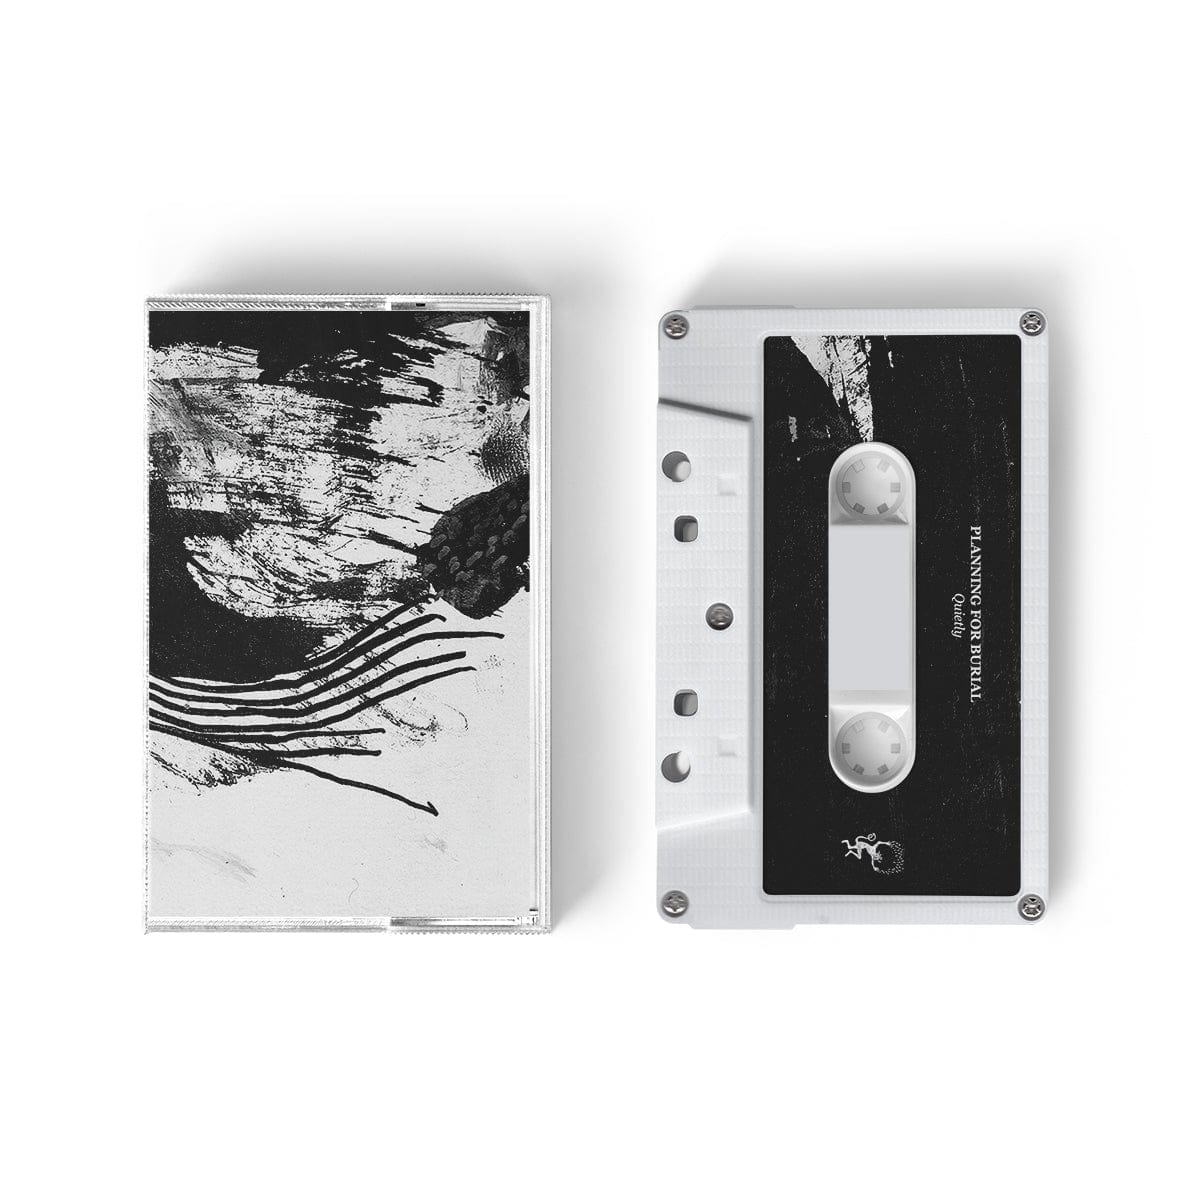 The Flenser Tapes Planning for Burial "Quietly" Tape